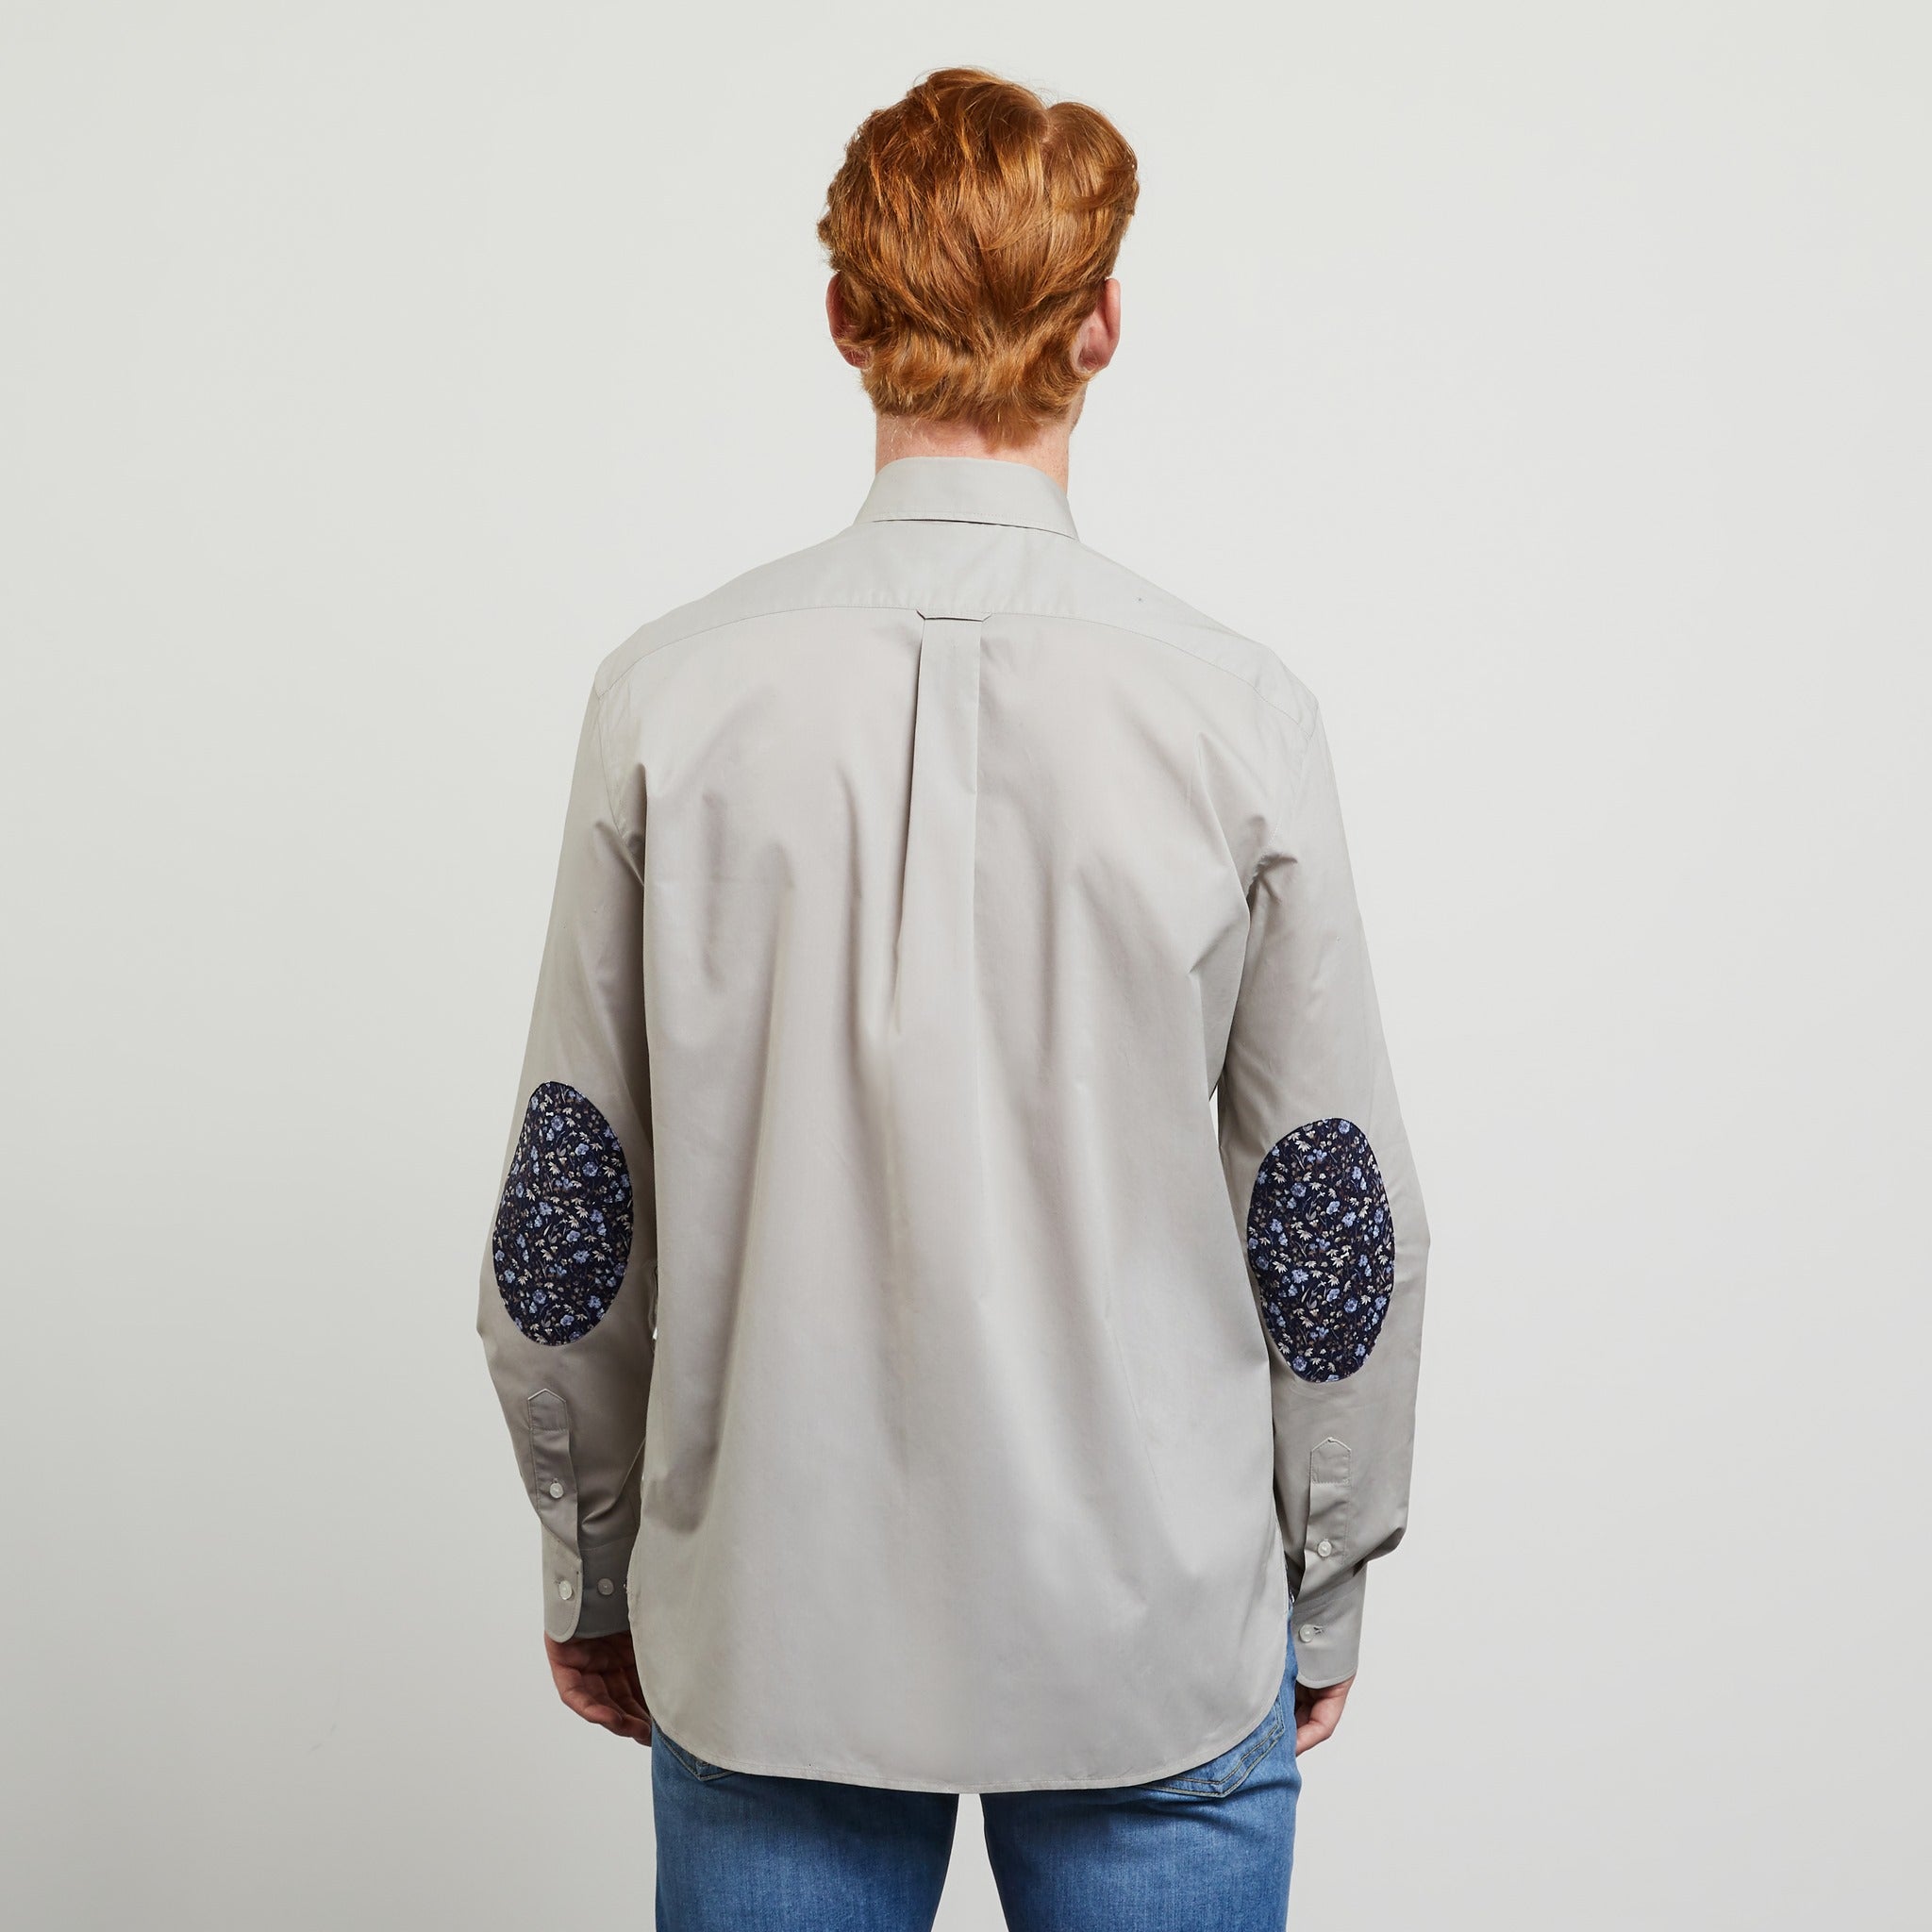 Grey Shirt With Decorative Elbow Patches - 03